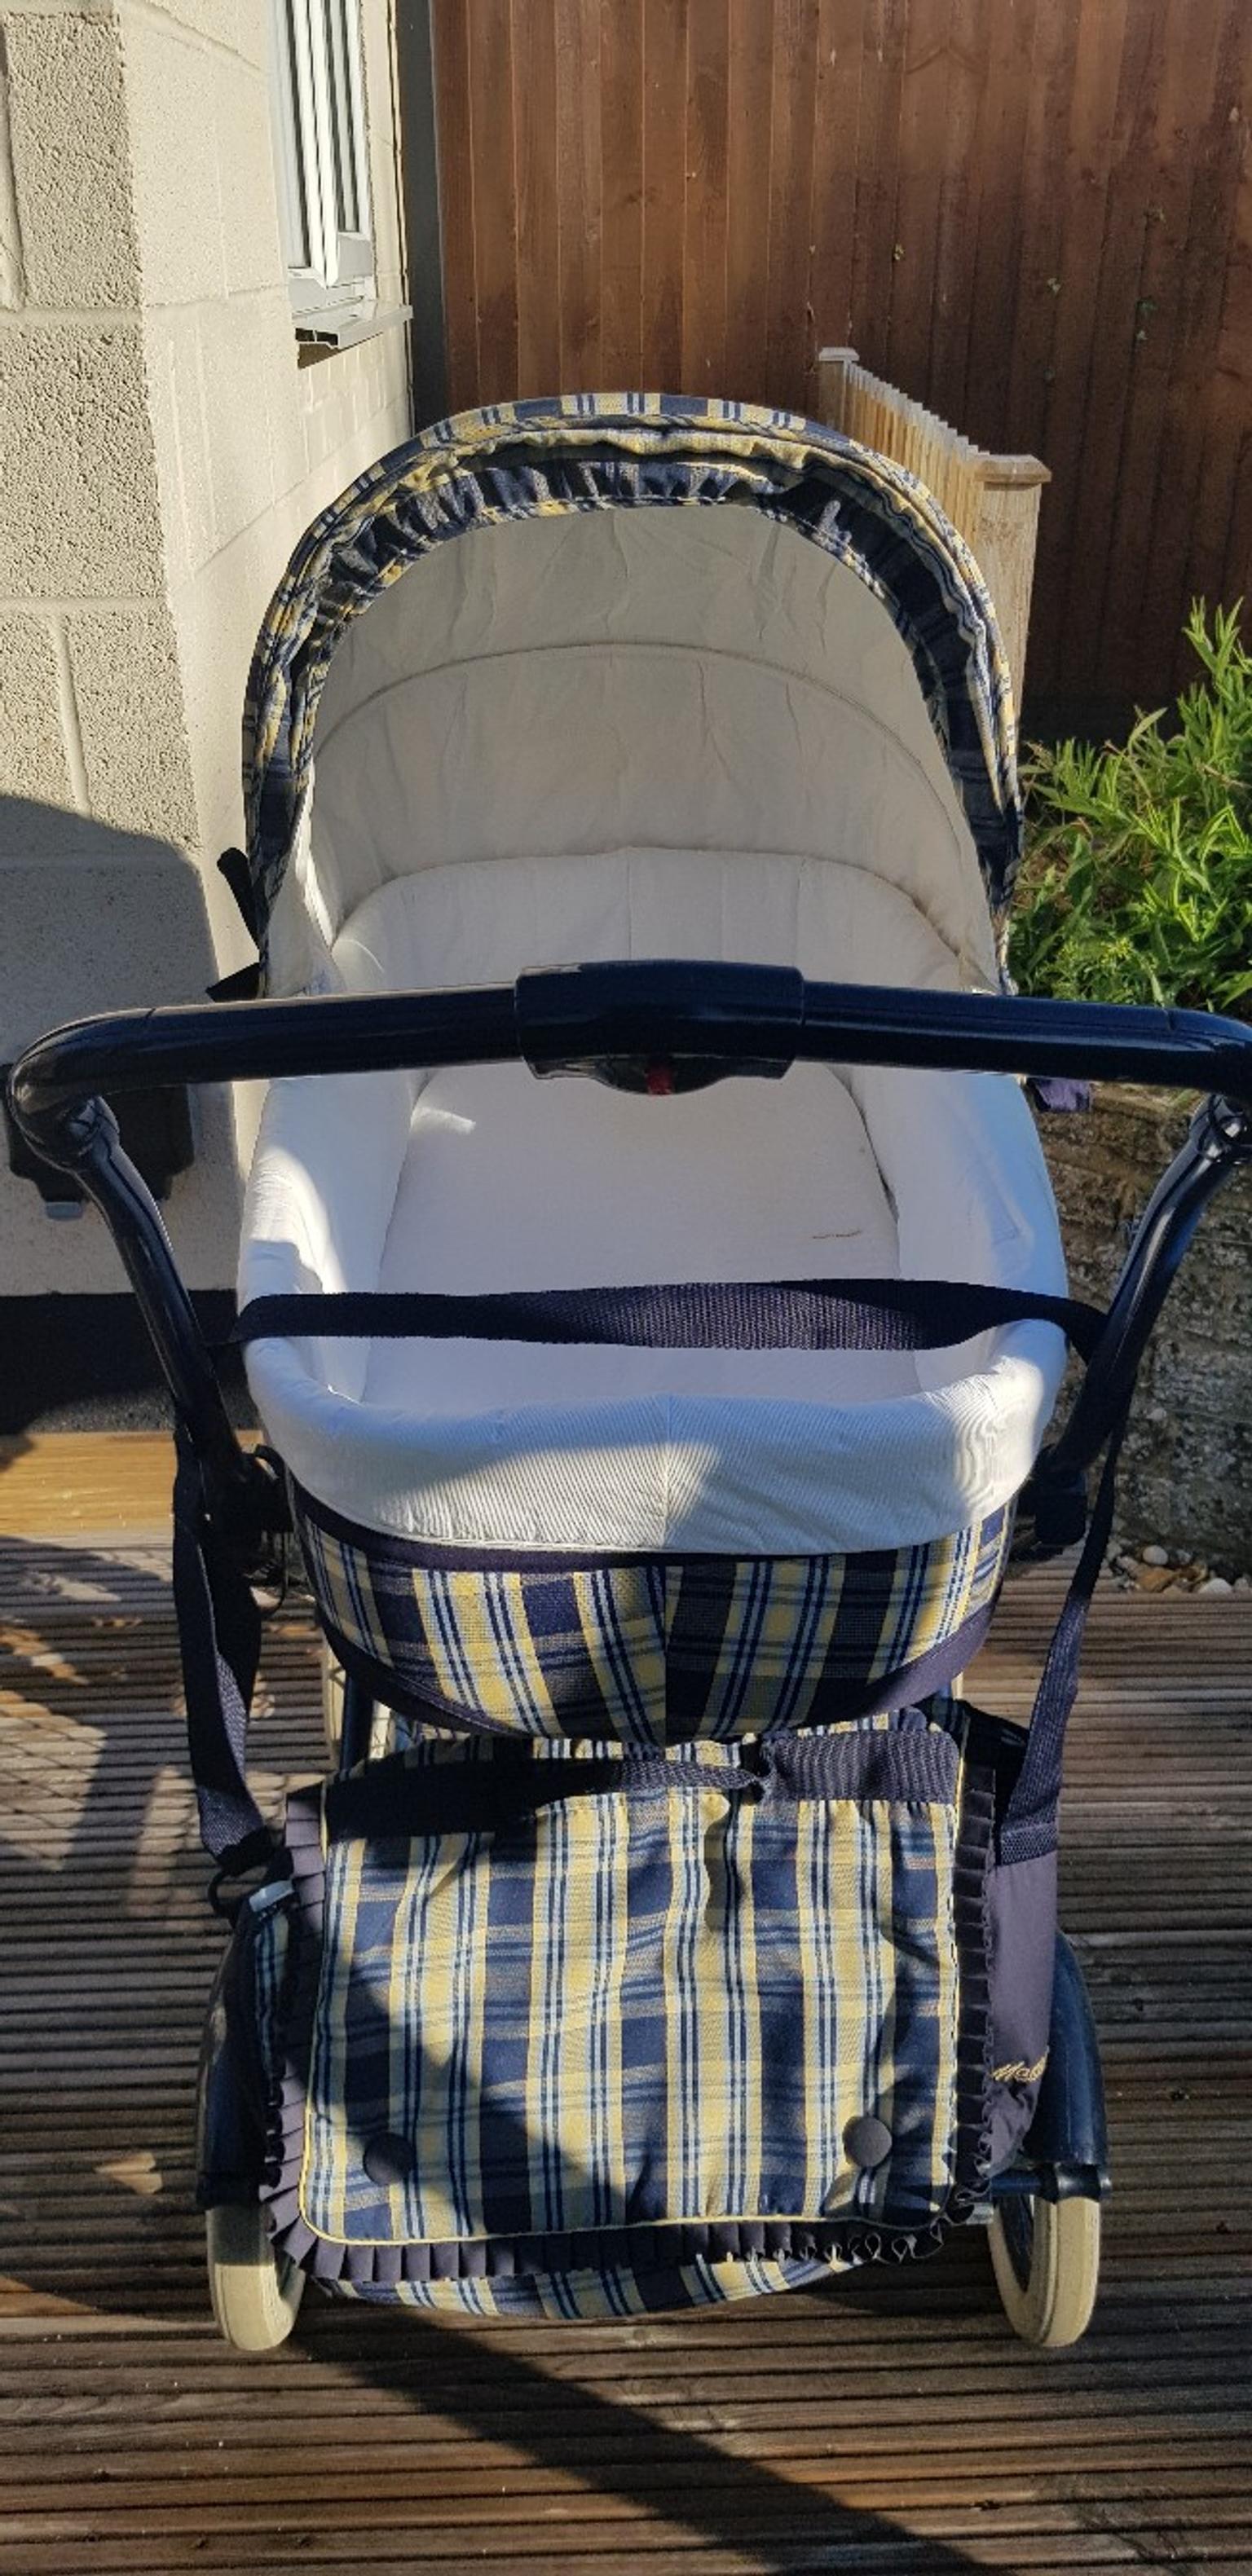 mamma and pappa pushchair